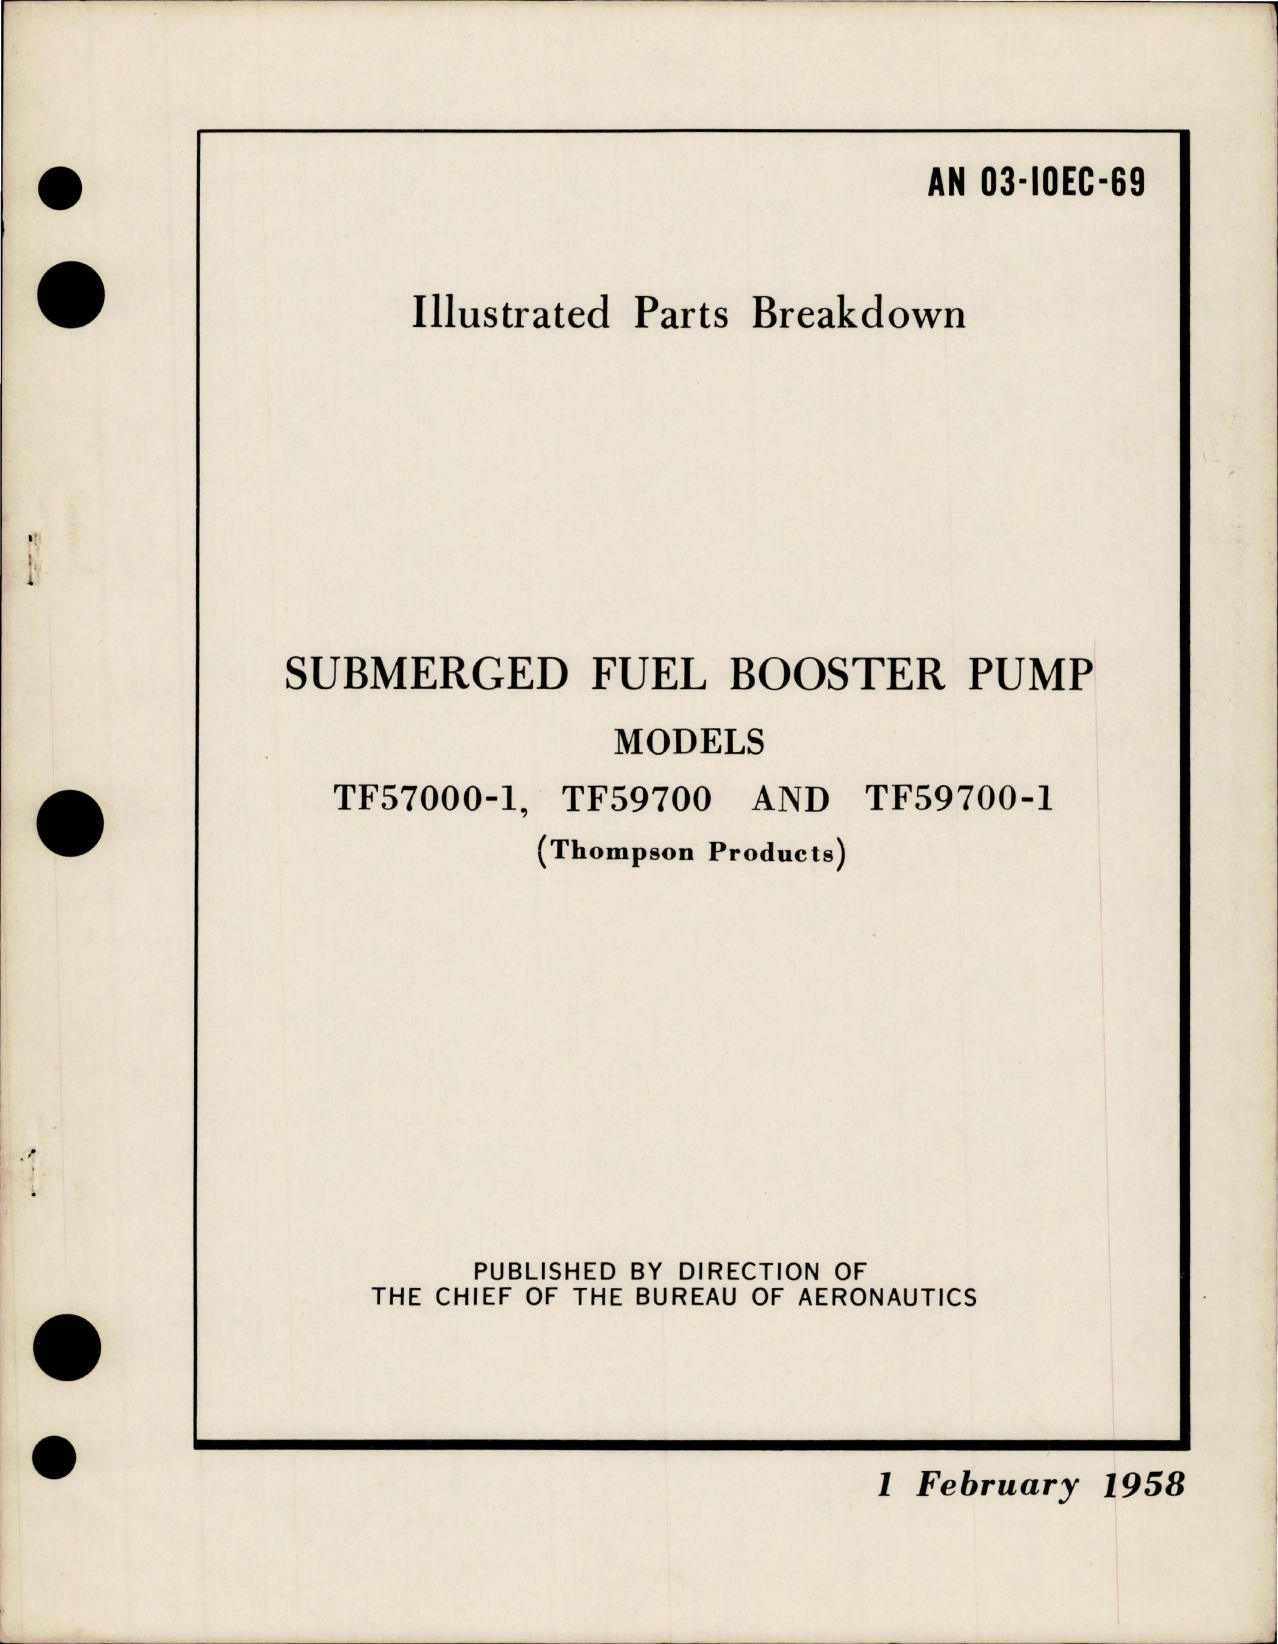 Sample page 1 from AirCorps Library document: Illustrated Parts Breakdown for Submerged Fuel Booster Pump - Models TF57000-1, TF59700 and TF59700-1